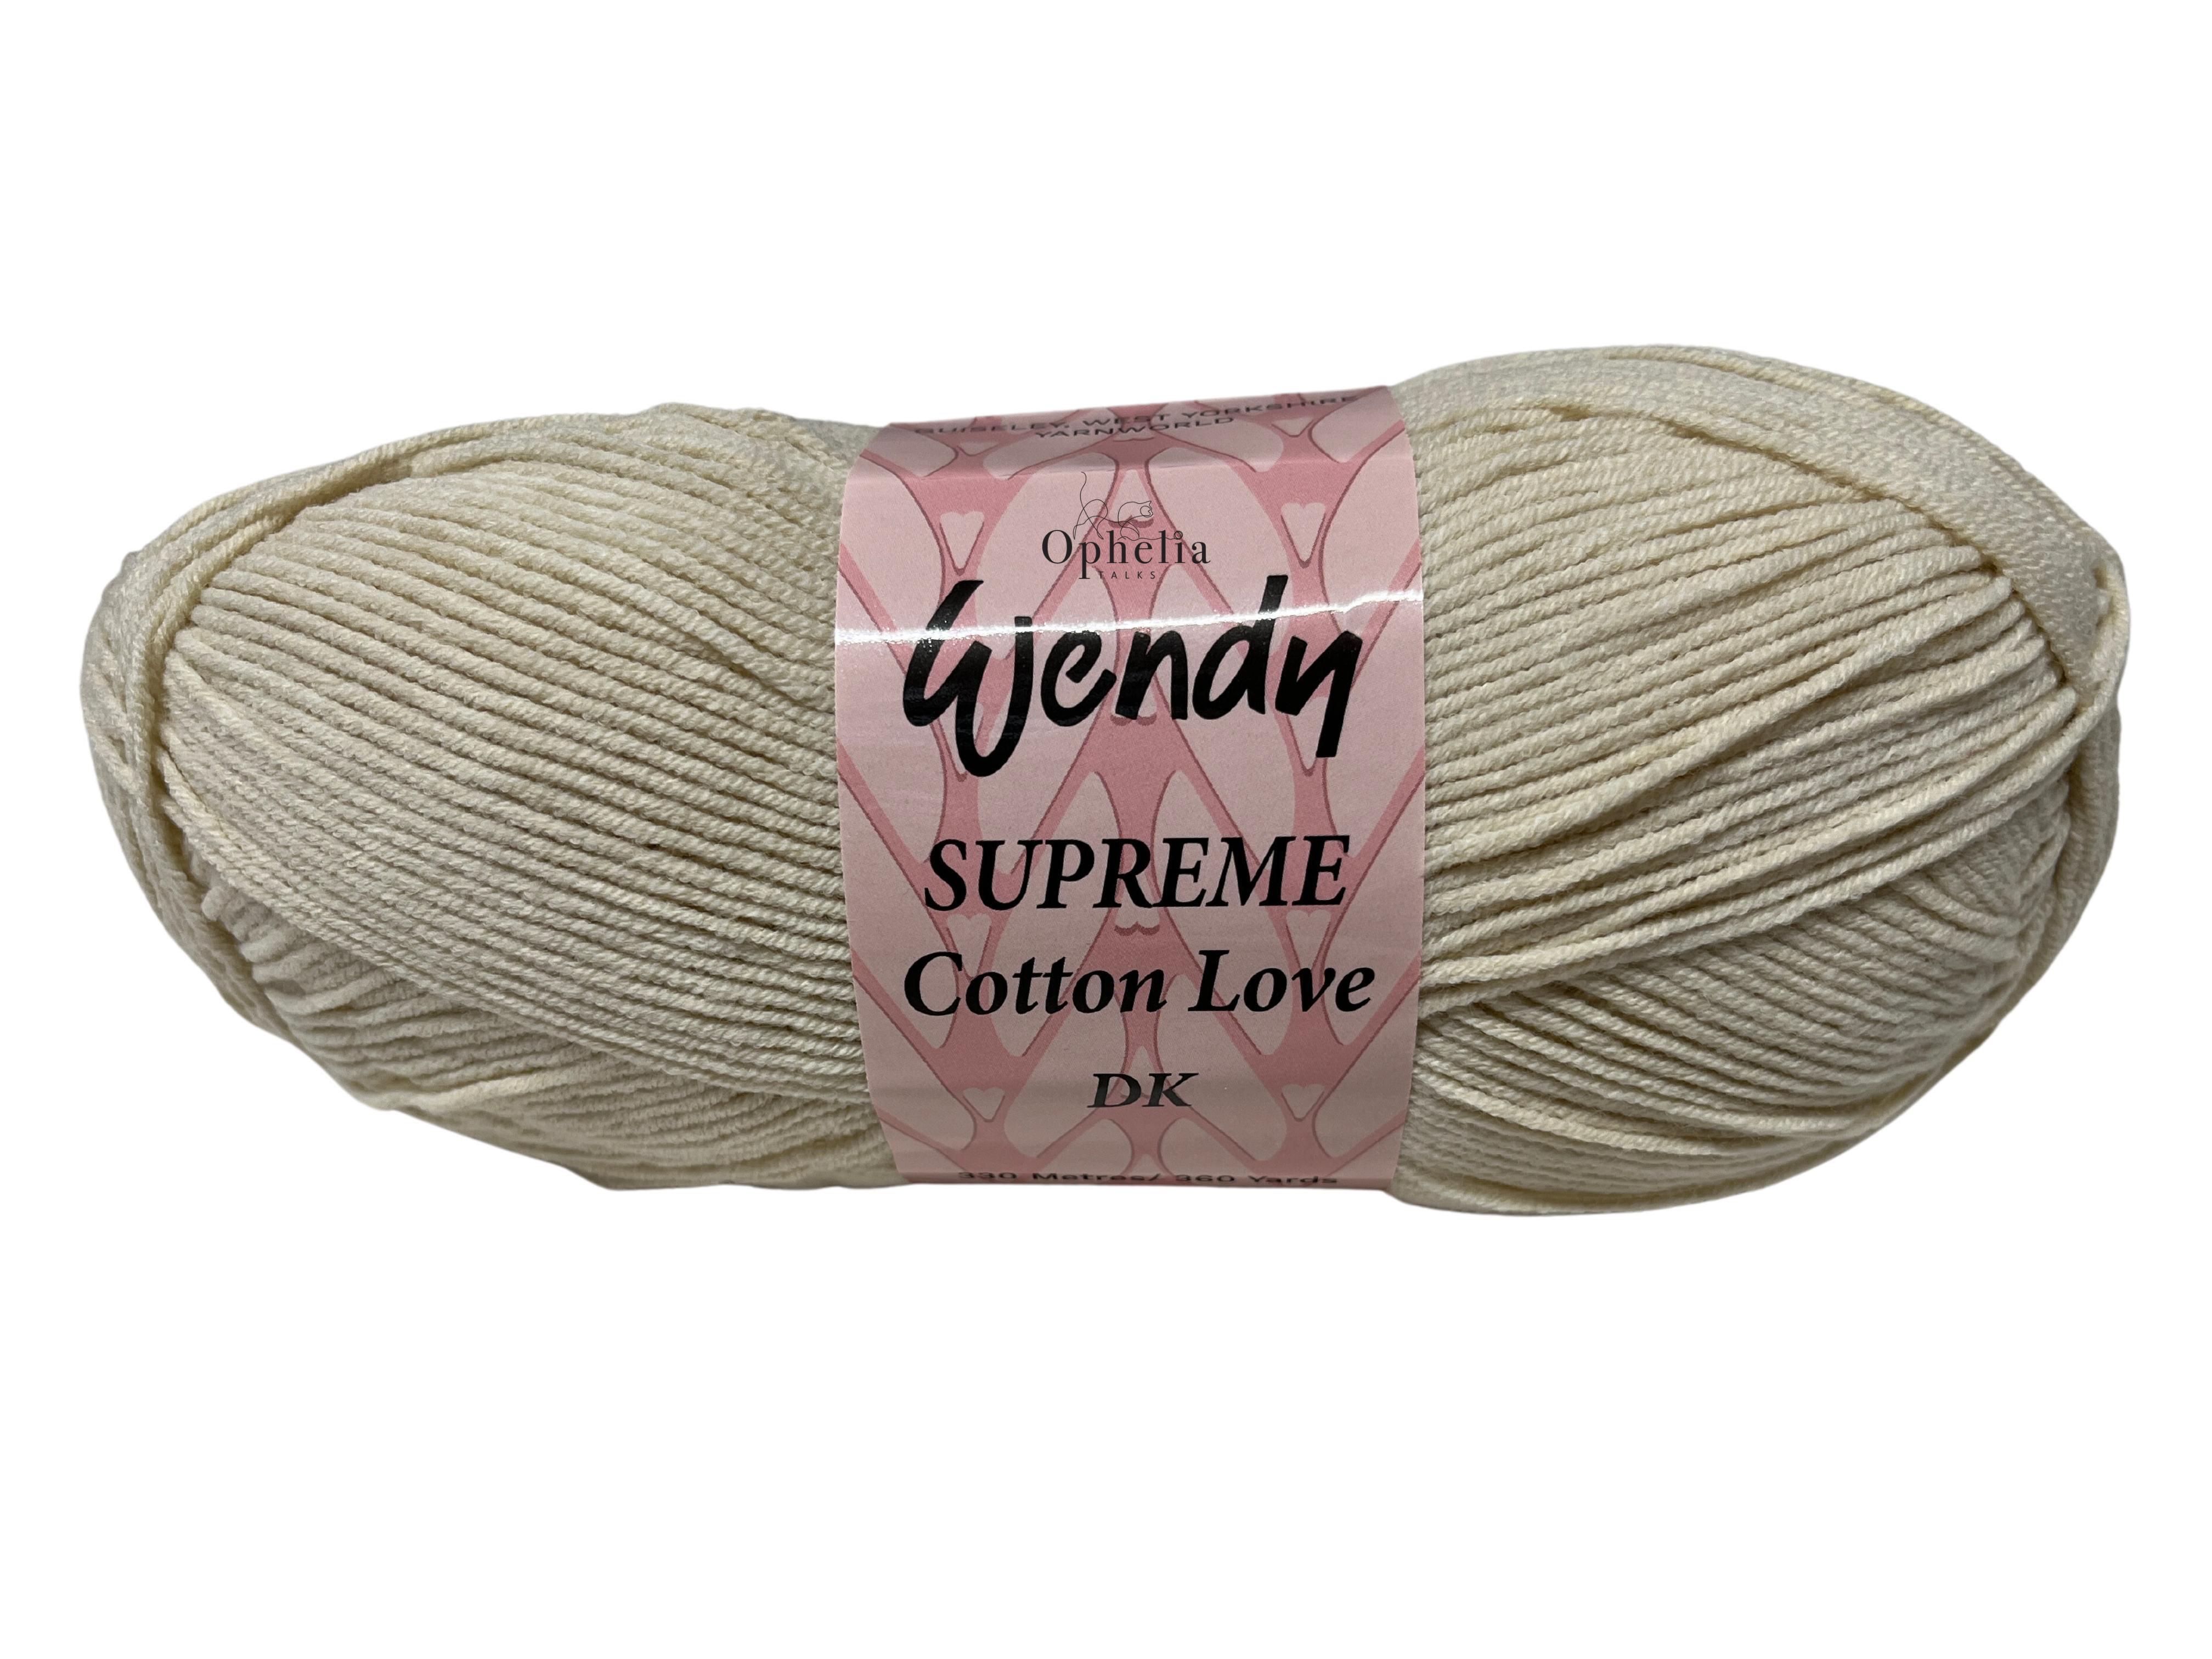 Wendy supreme cotton love in the colour Linen WCT04